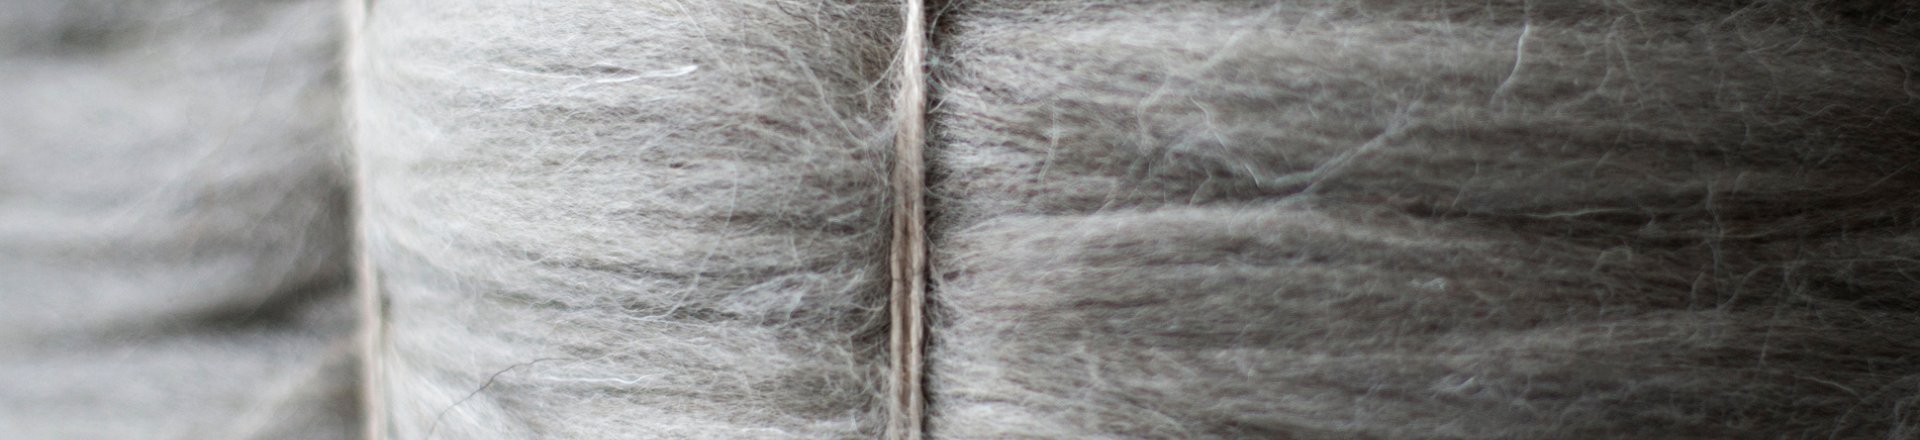 Why wool? The benefits of wool.